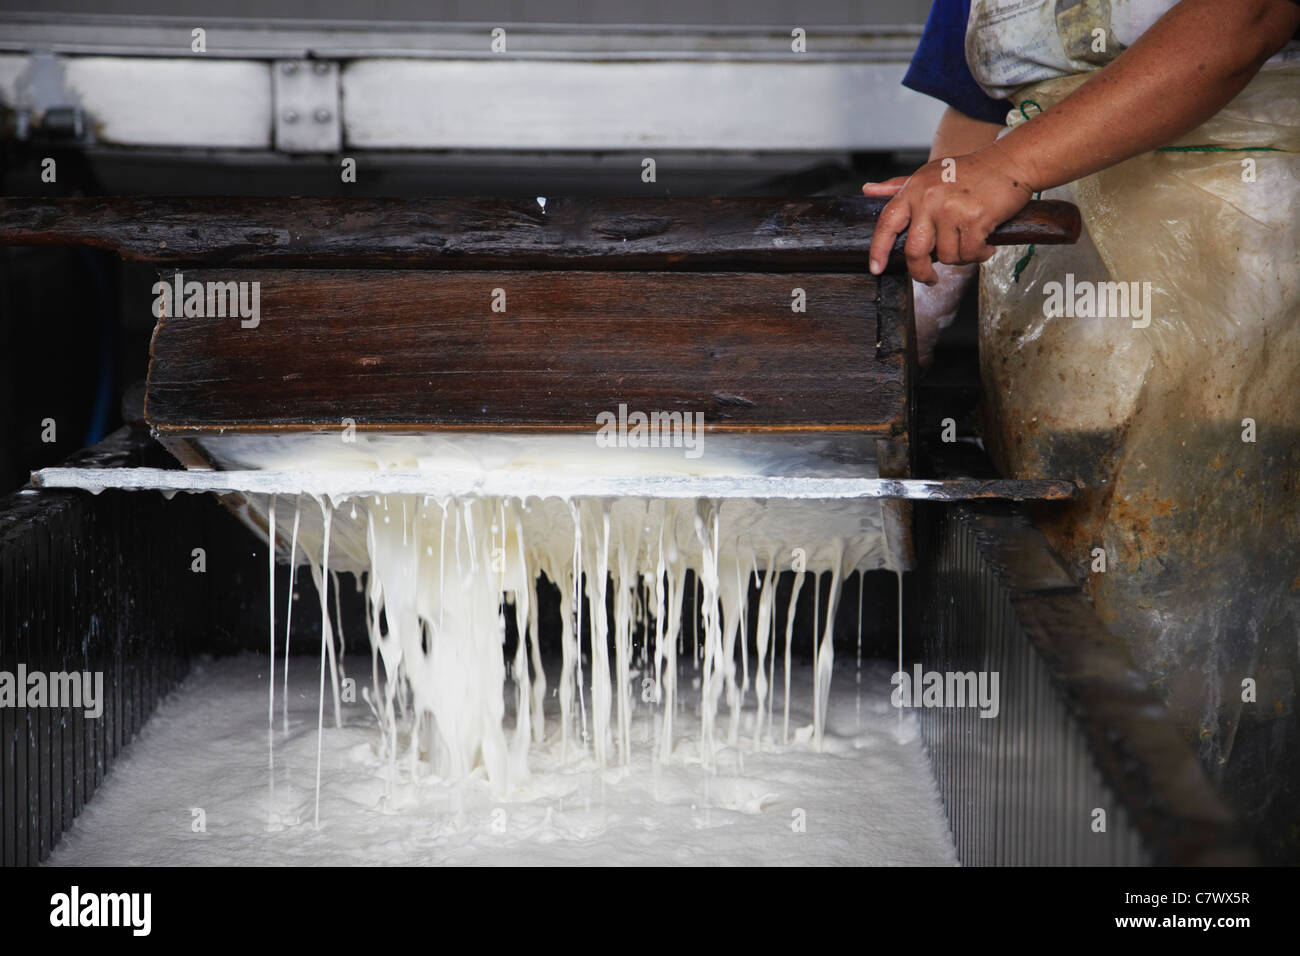 Our Rubber Making Processes